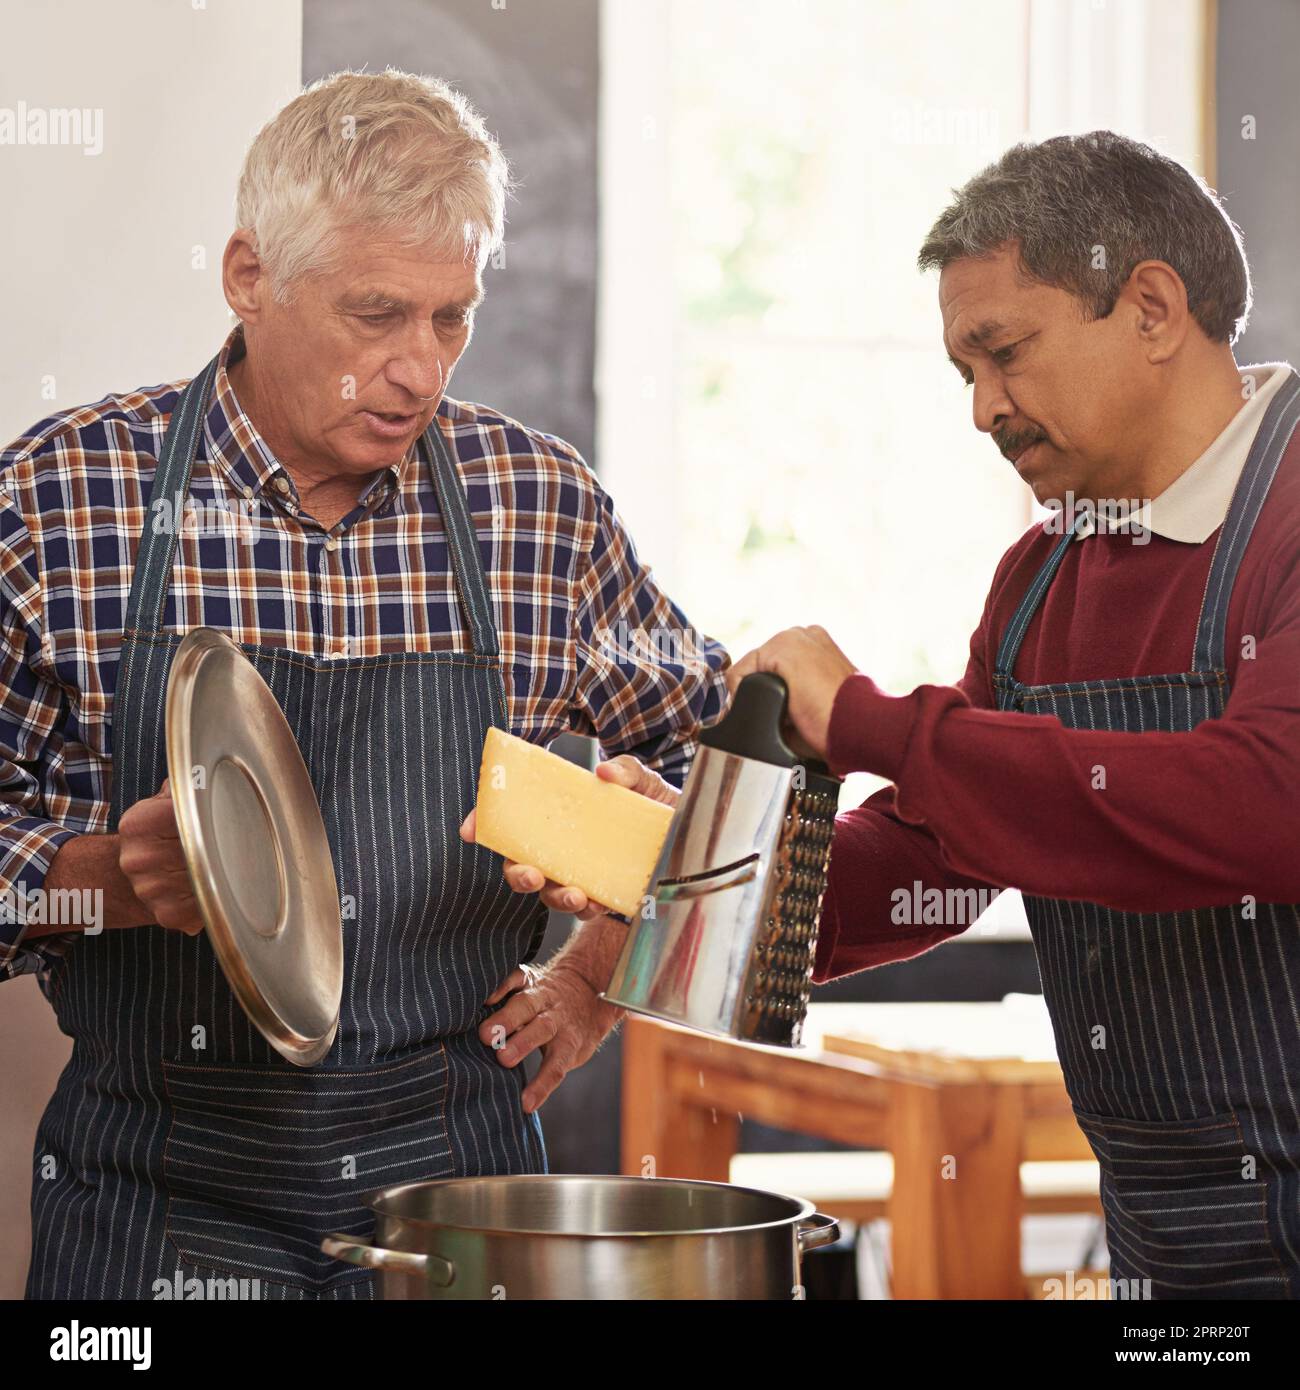 Its all about the cheese. two senior men cooking in the kitchen. Stock Photo